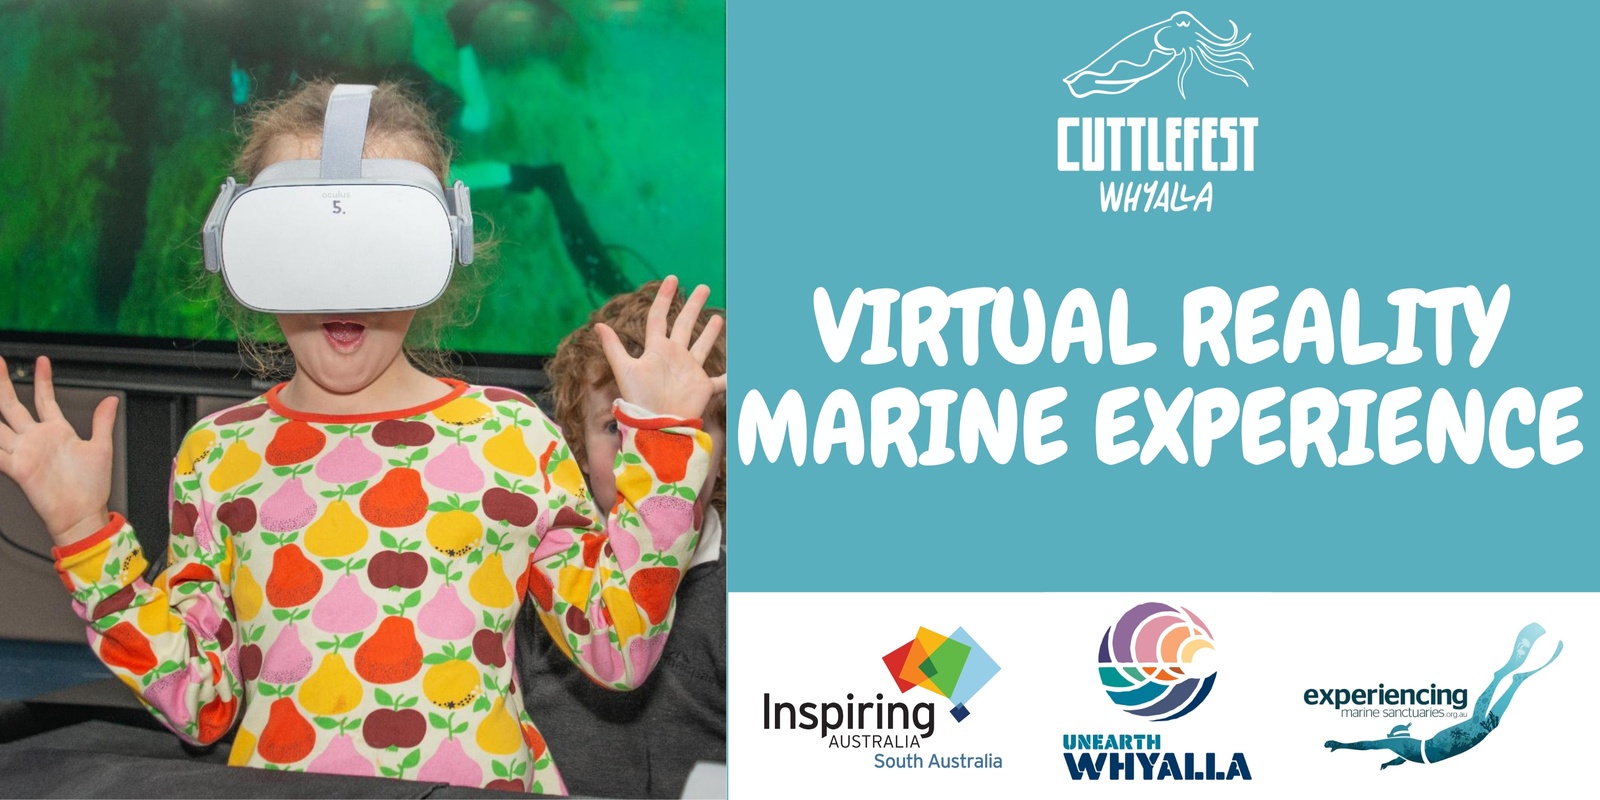 Banner image for VR Marine Experience - Cuttlefest 